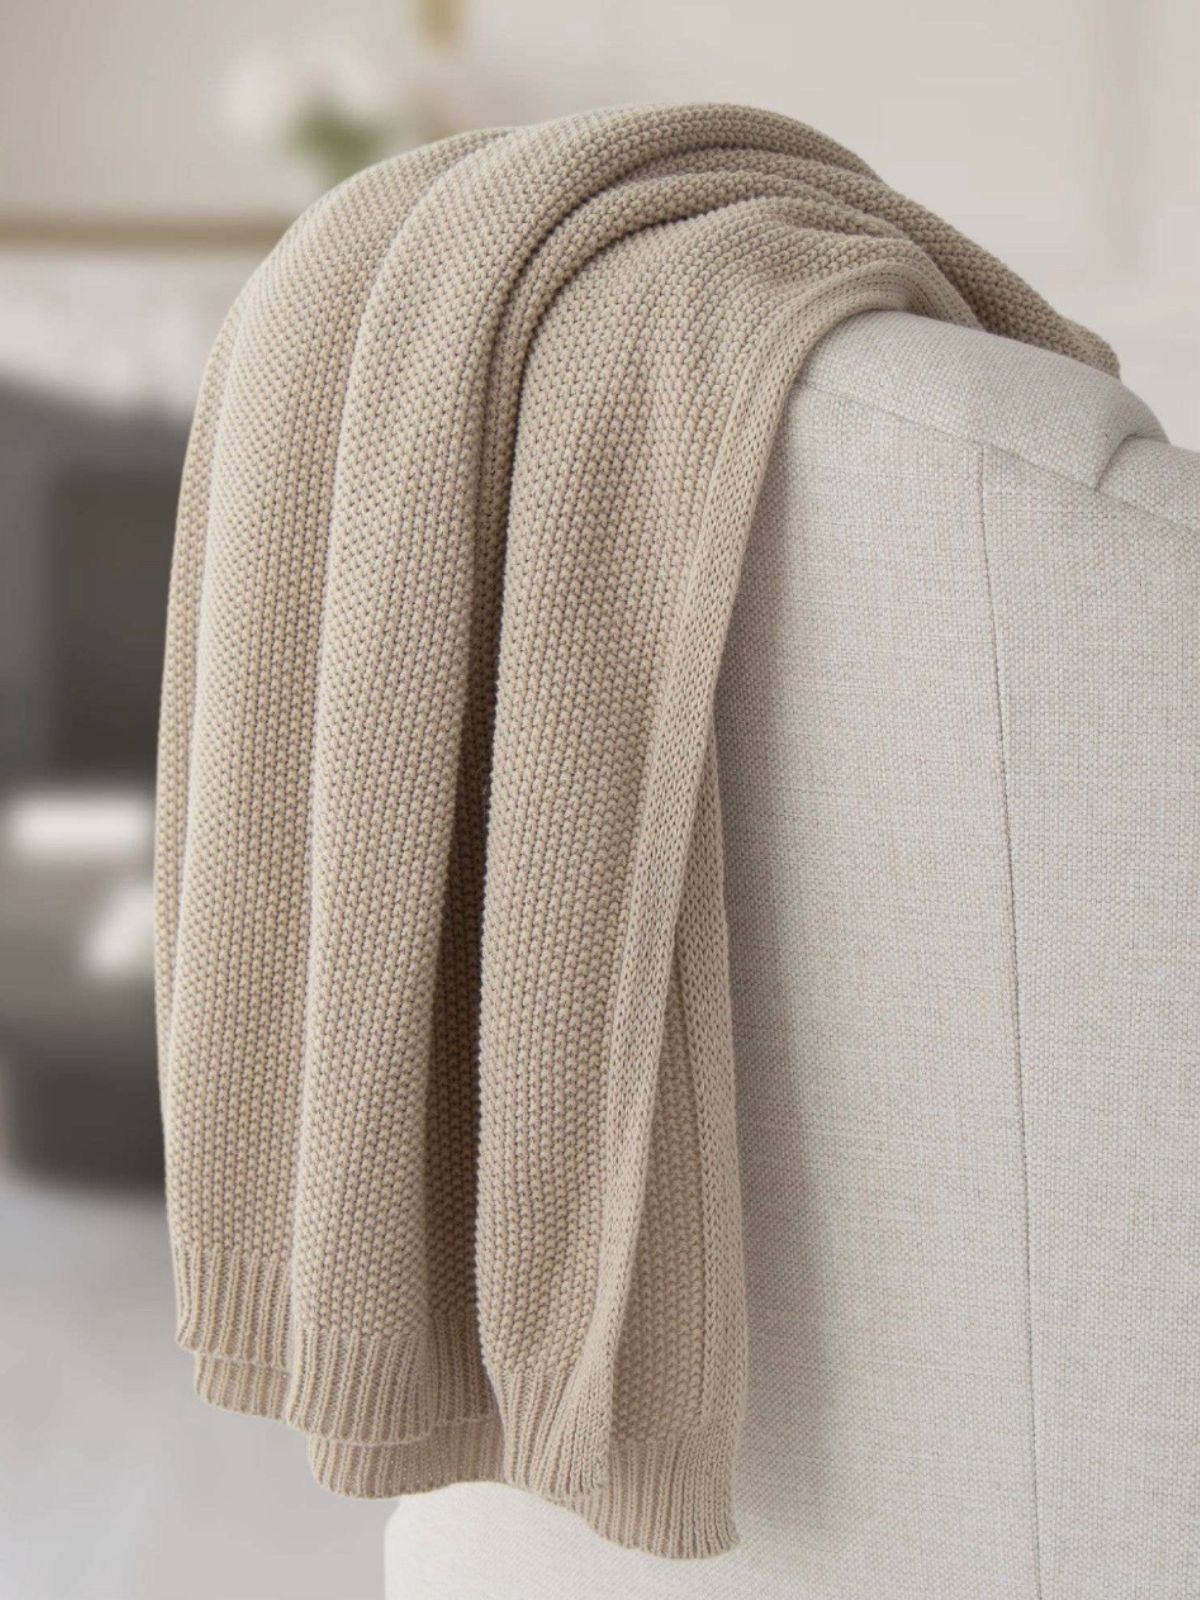 100% Cotton Seedstitch Knit Decorative Throw Blanket Available in Luxury Oatmeal Color Sold by KYA Home Decor, 50W x 60L. 